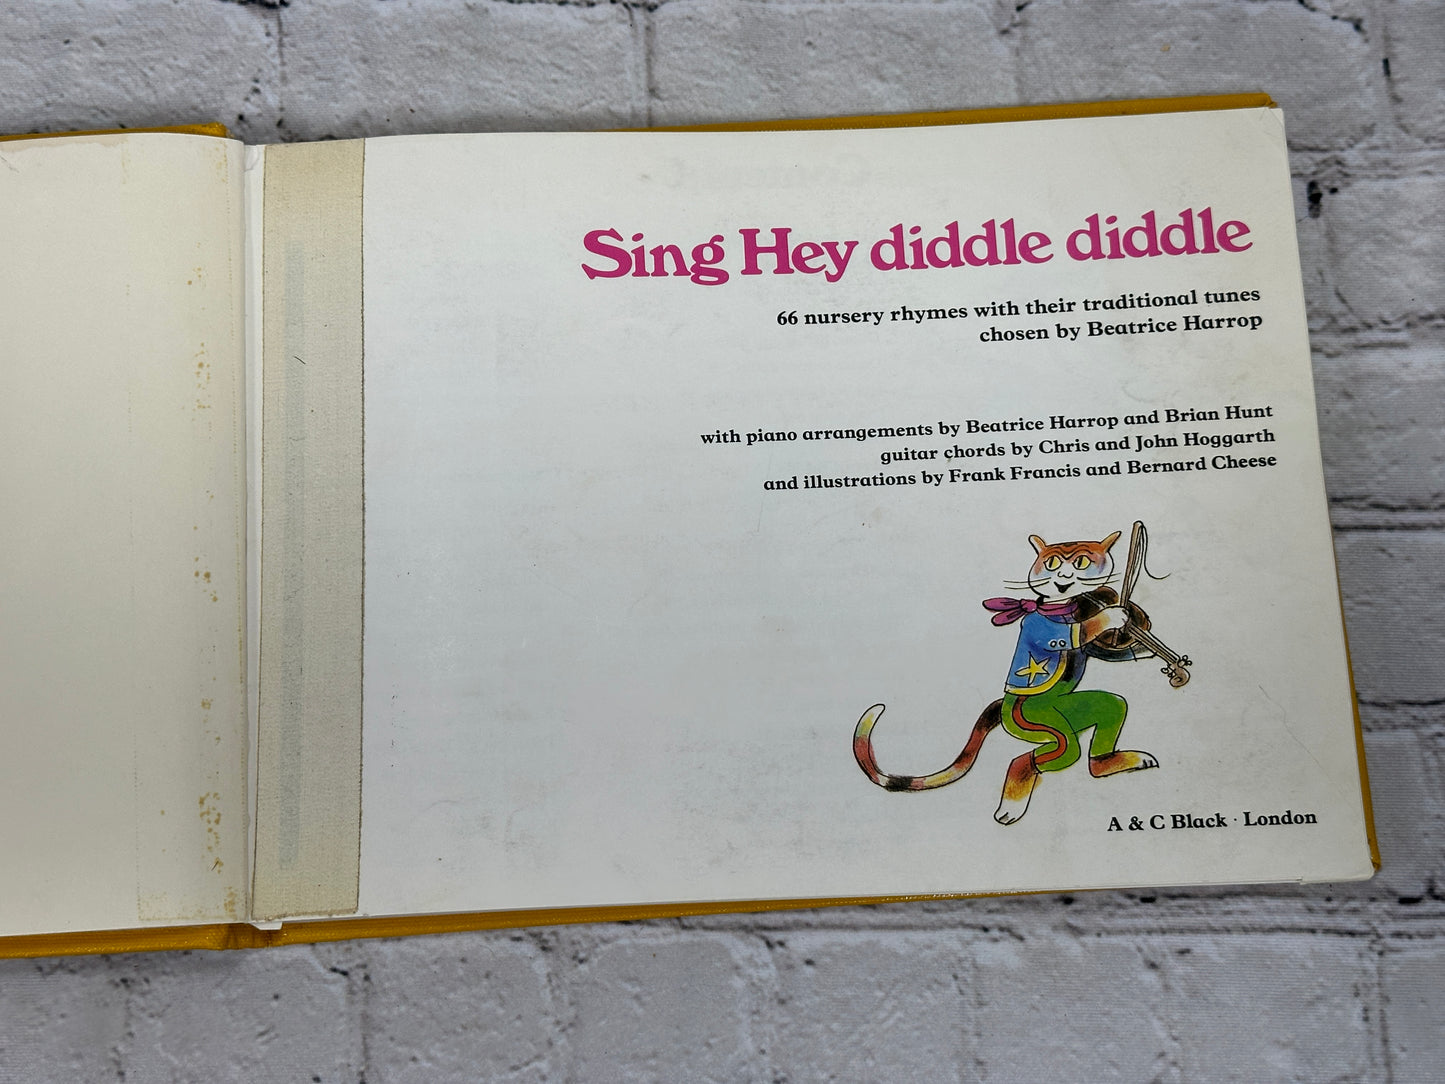 Sing Hey Diddle Diddle by Beatrice Harrop [1983]